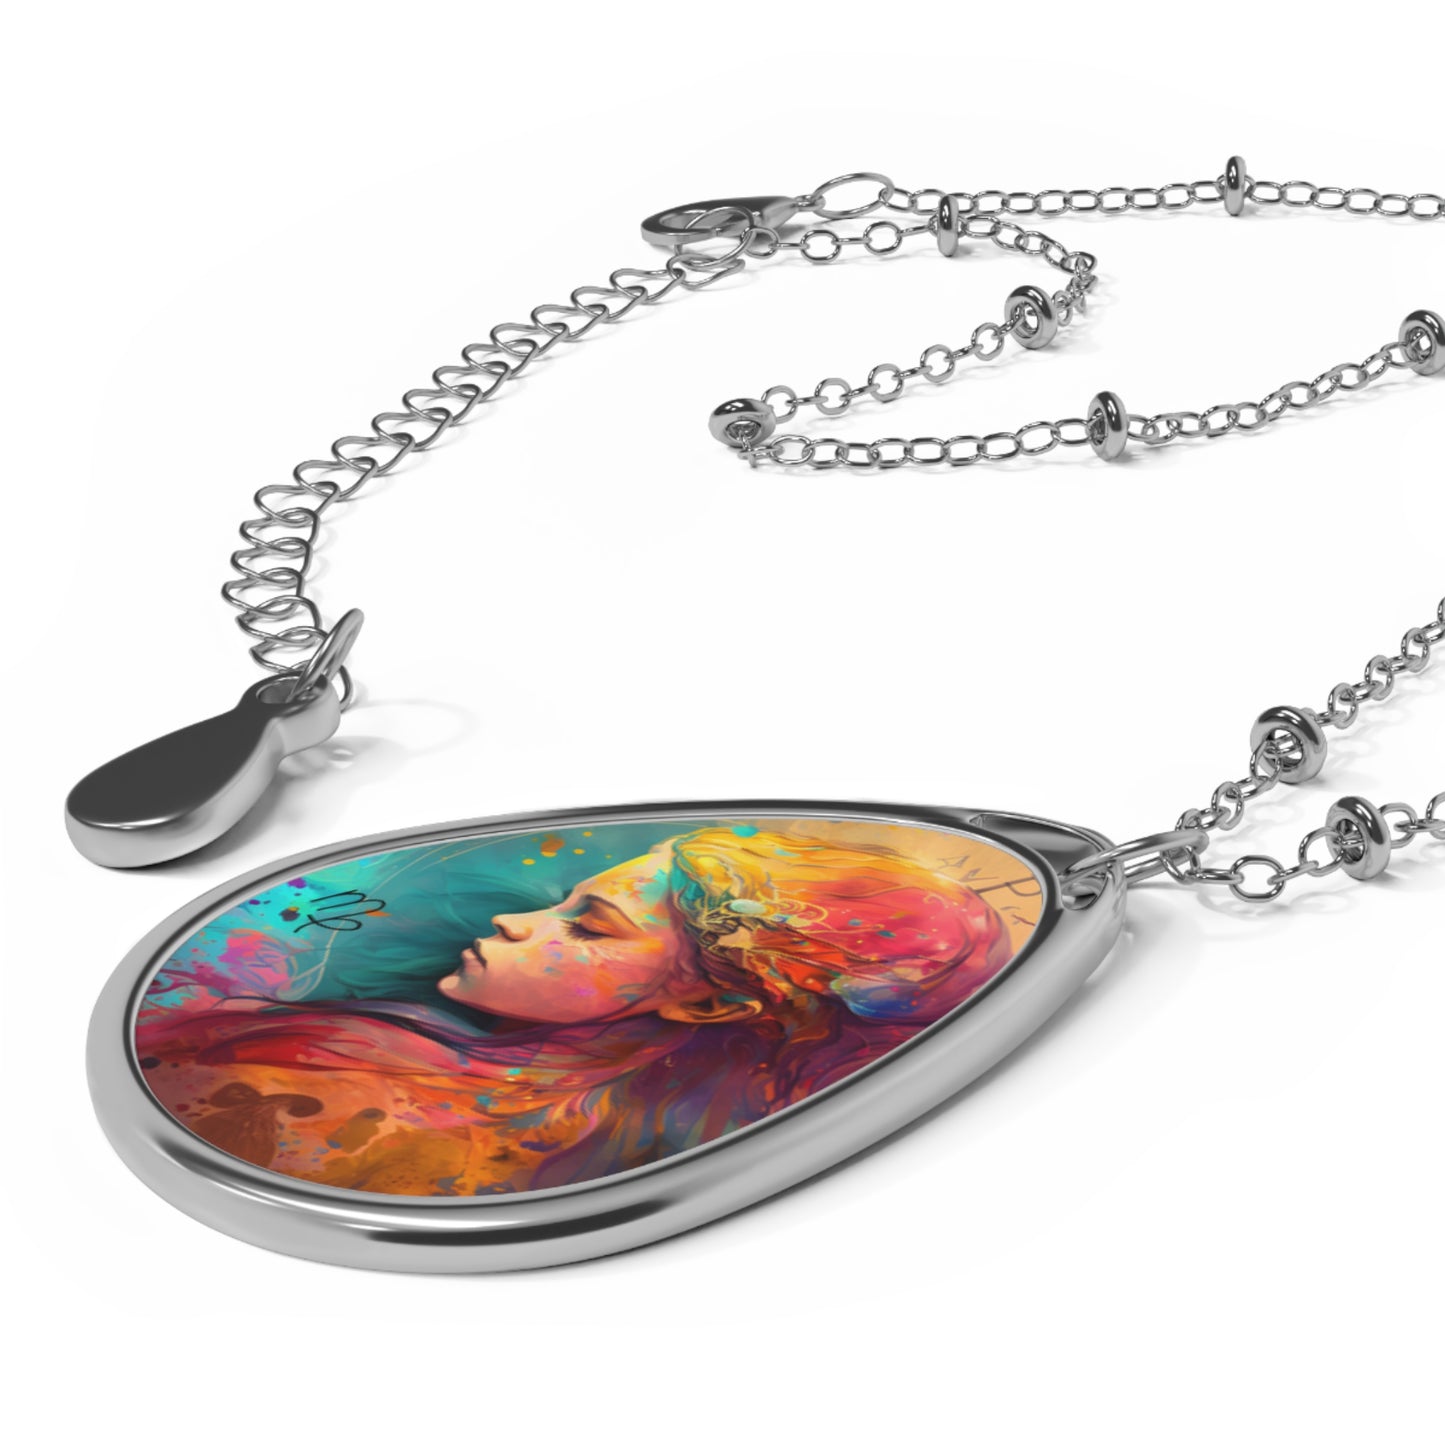 Virgo Zodiac Sign ~ Virgo the Artist of the Earth ~ Necklace & Oval Pendant With Chain